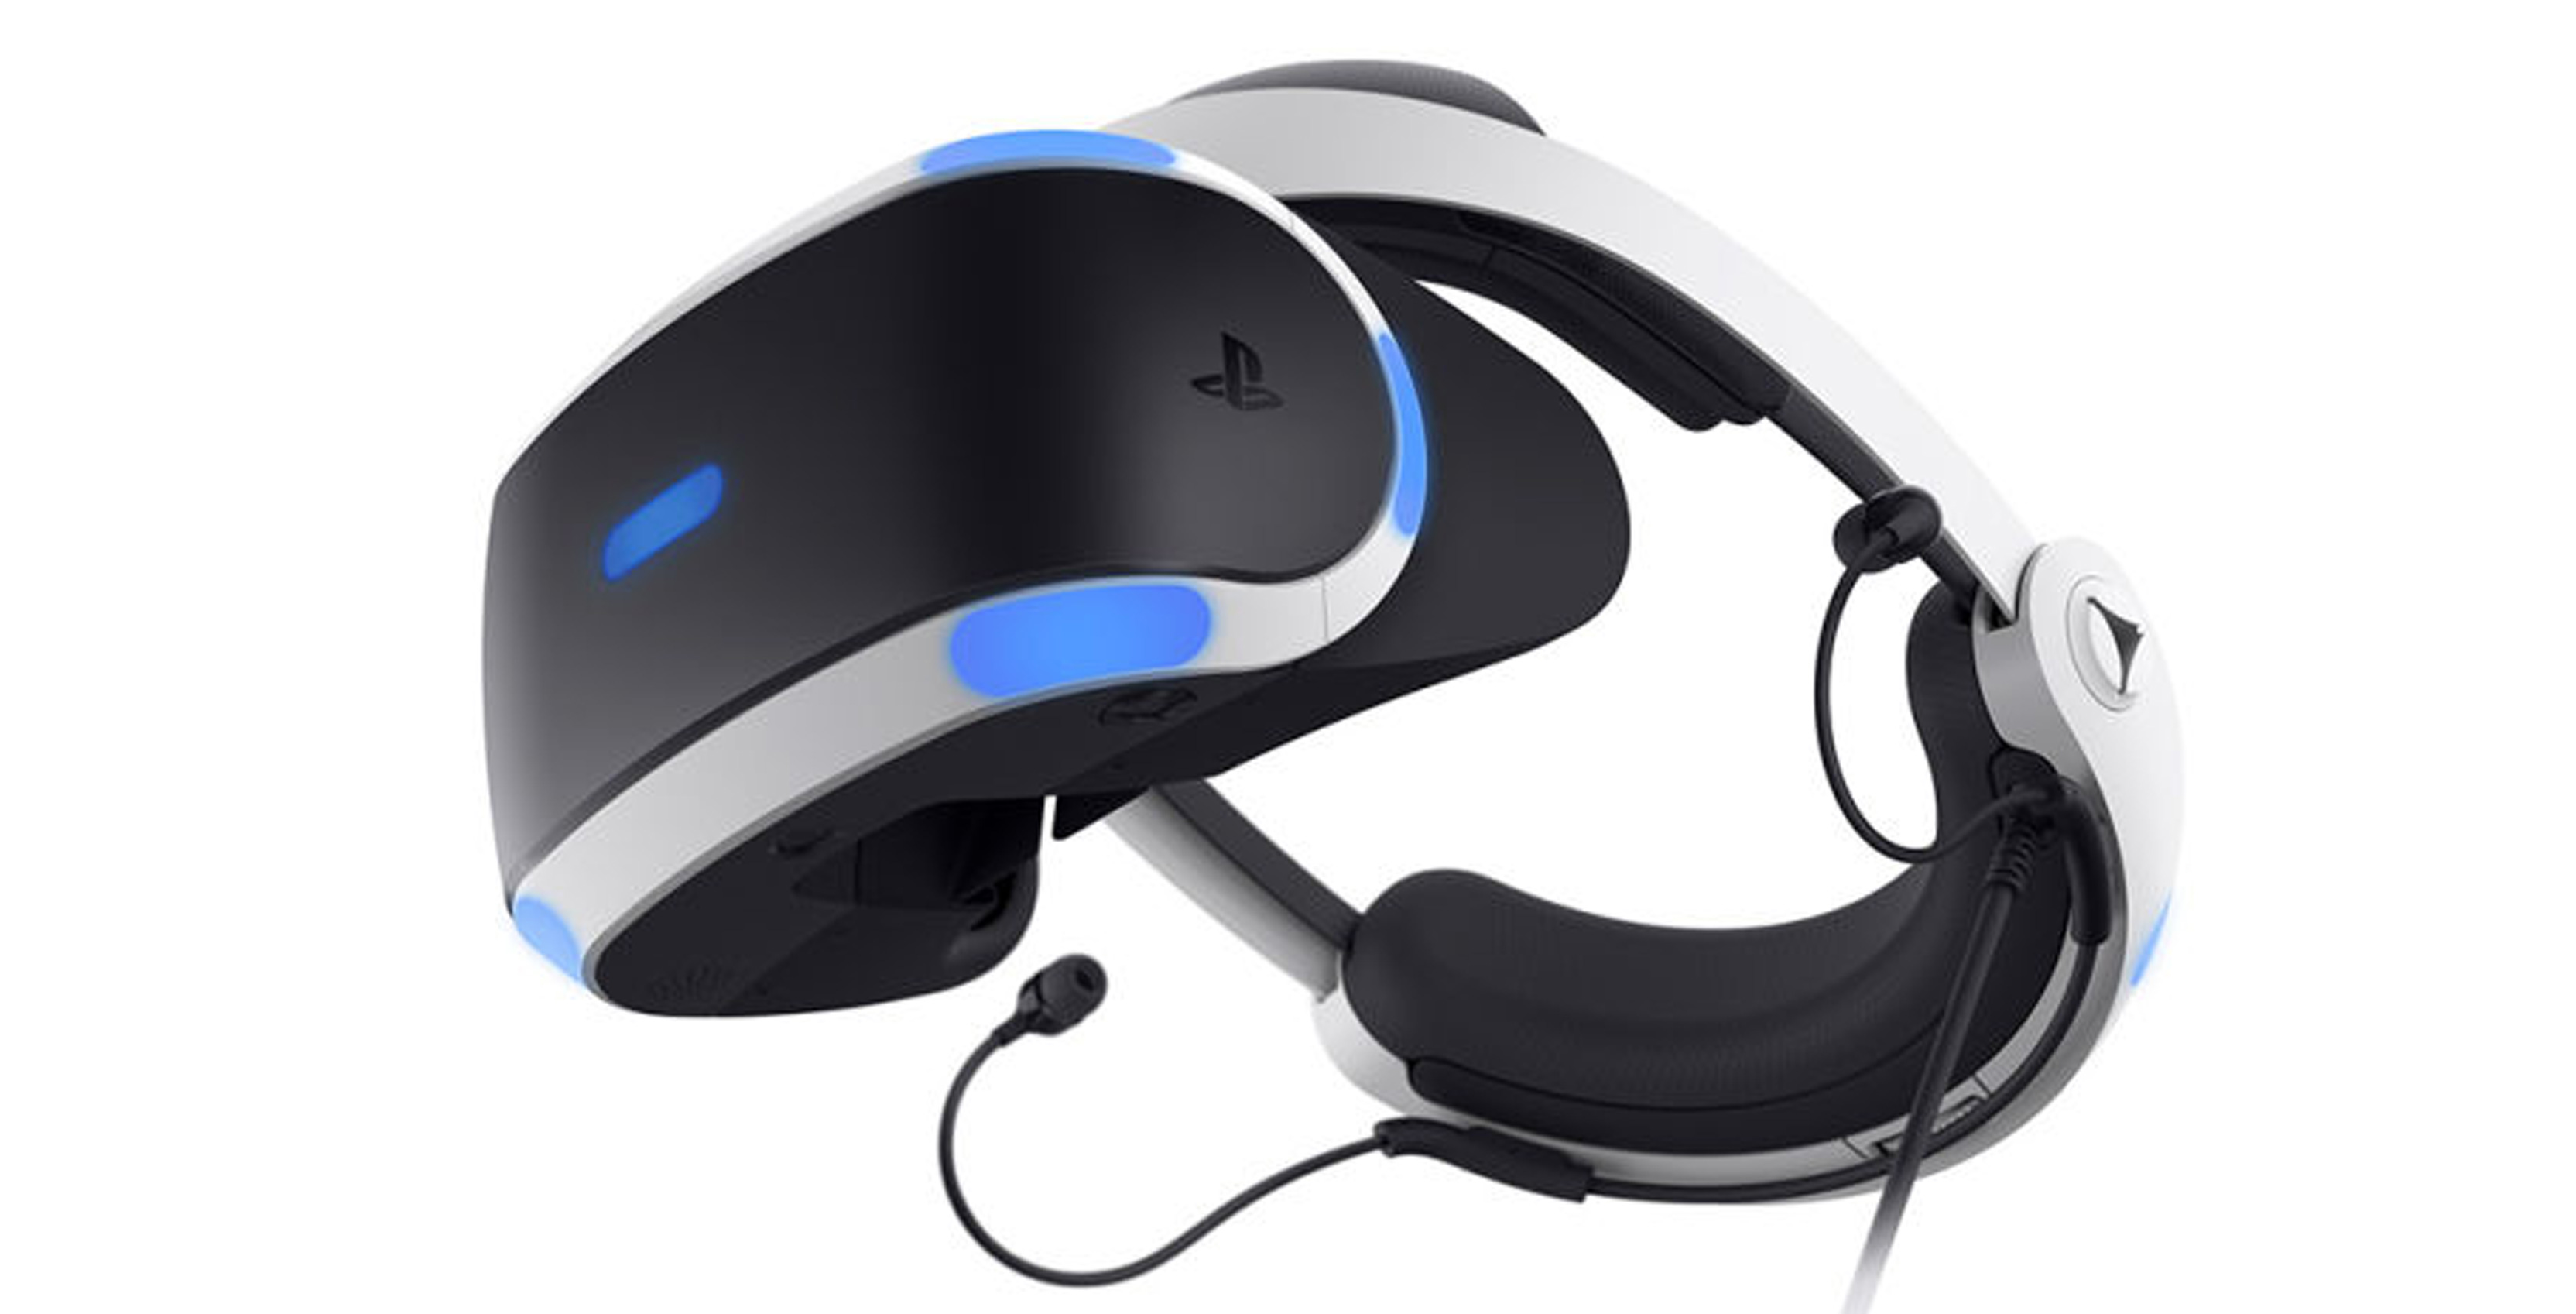 The new PlayStation VR headset features a new design